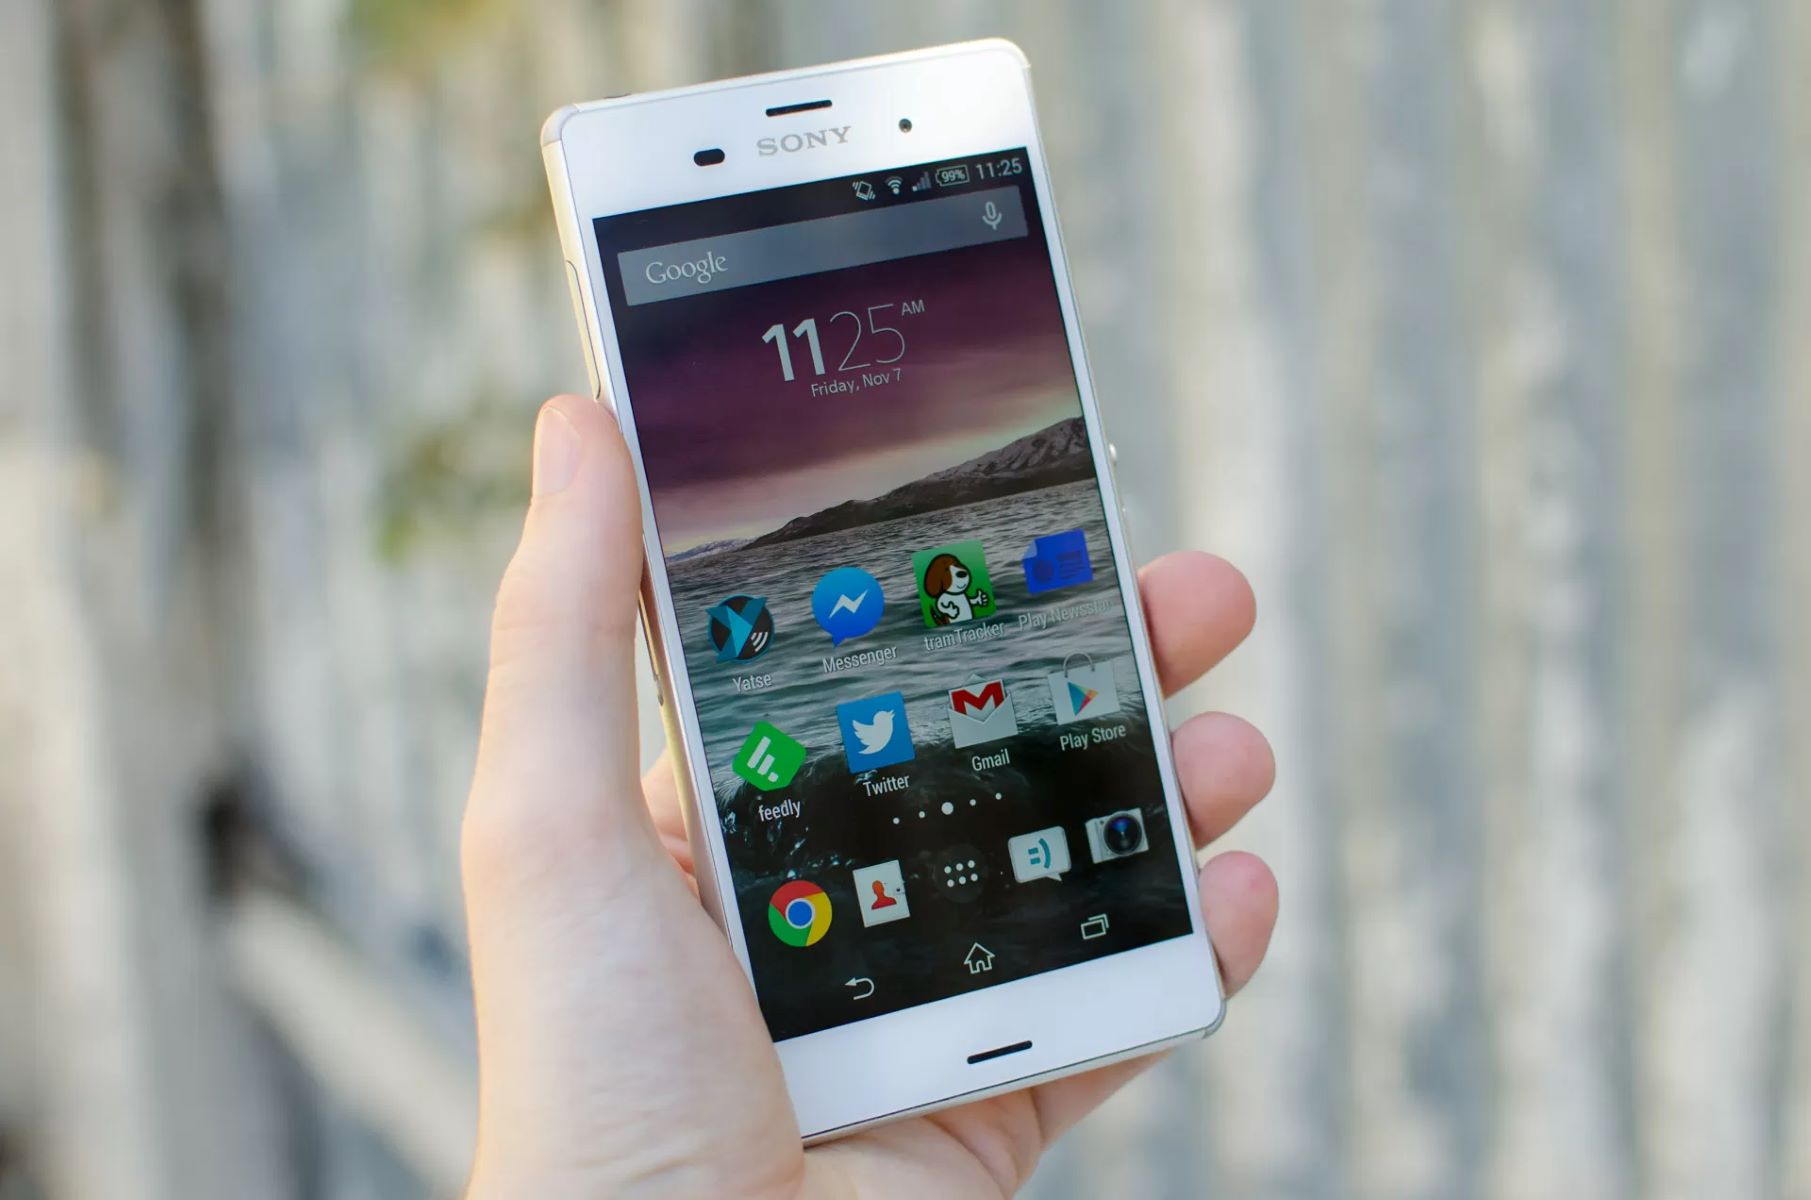 Sony Xperia R8001 User Manual: A Complete Guide